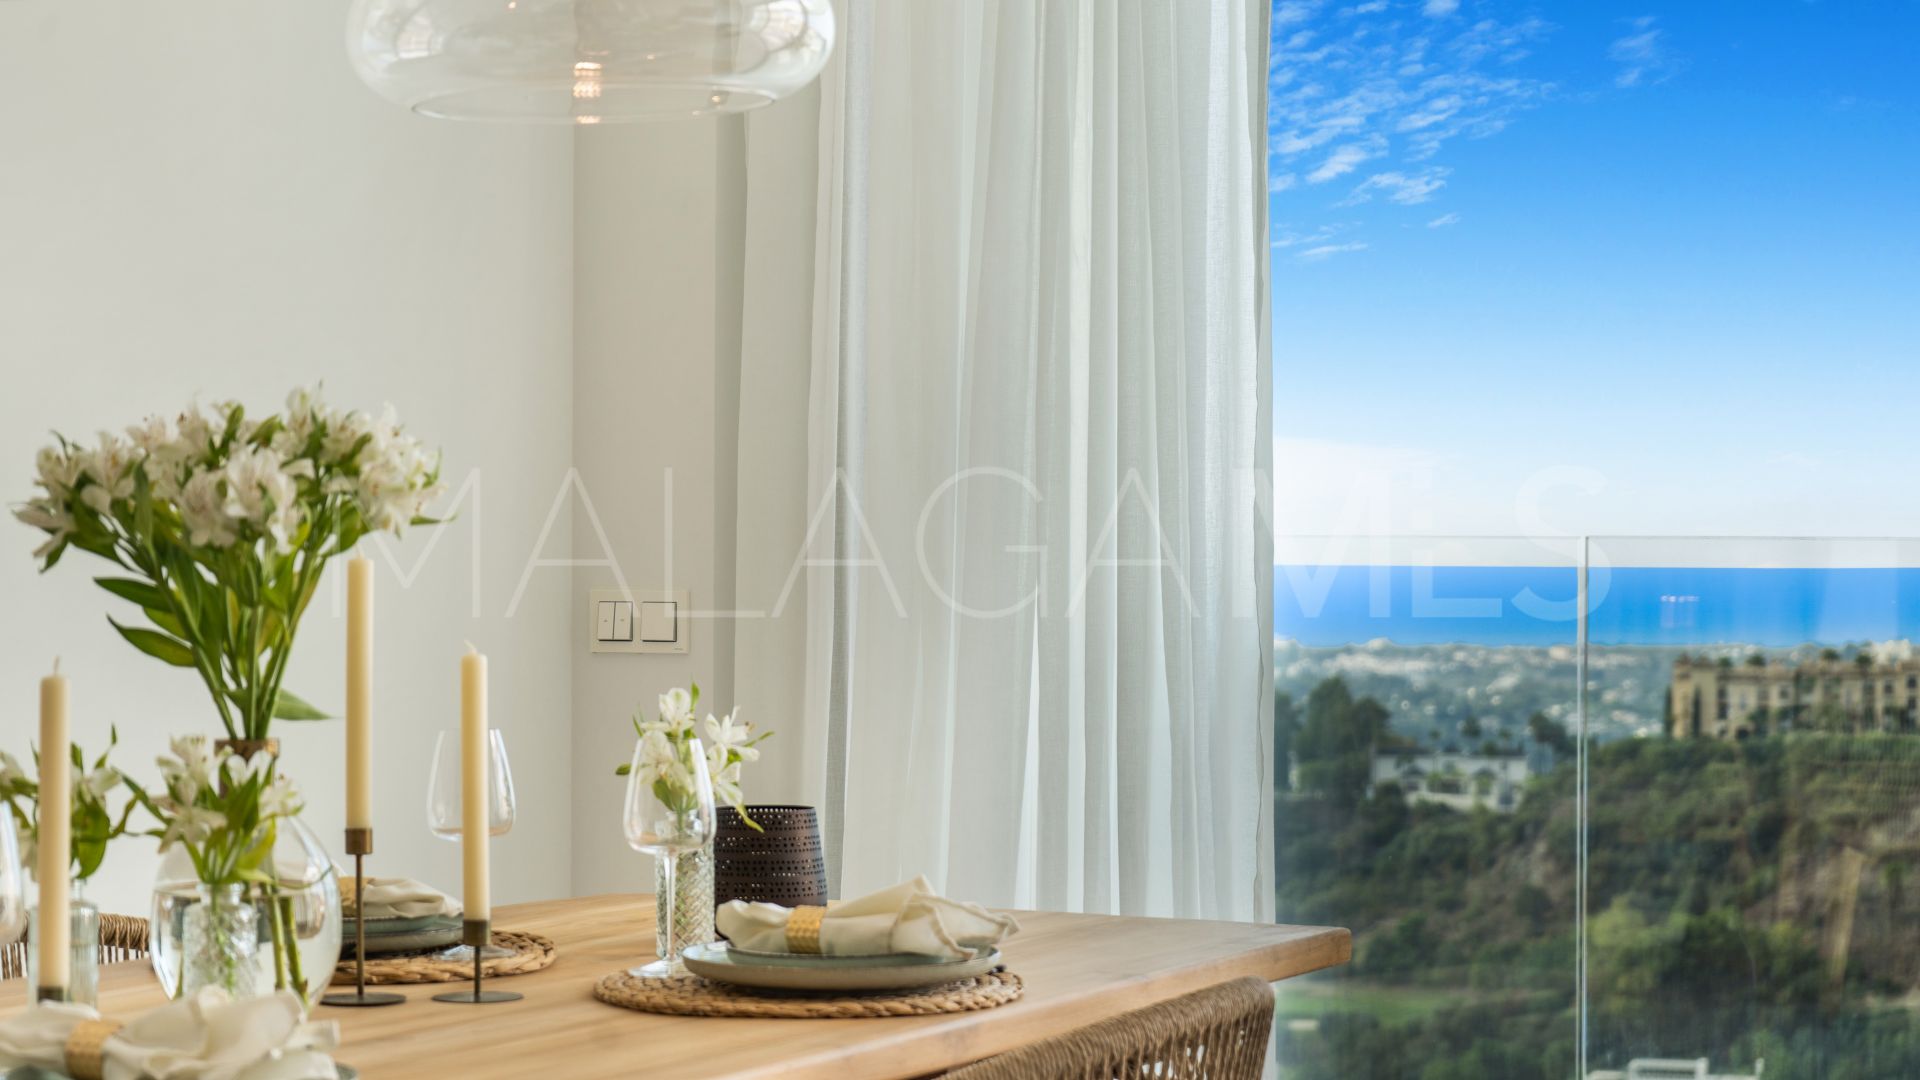 Apartment in The View Marbella for sale